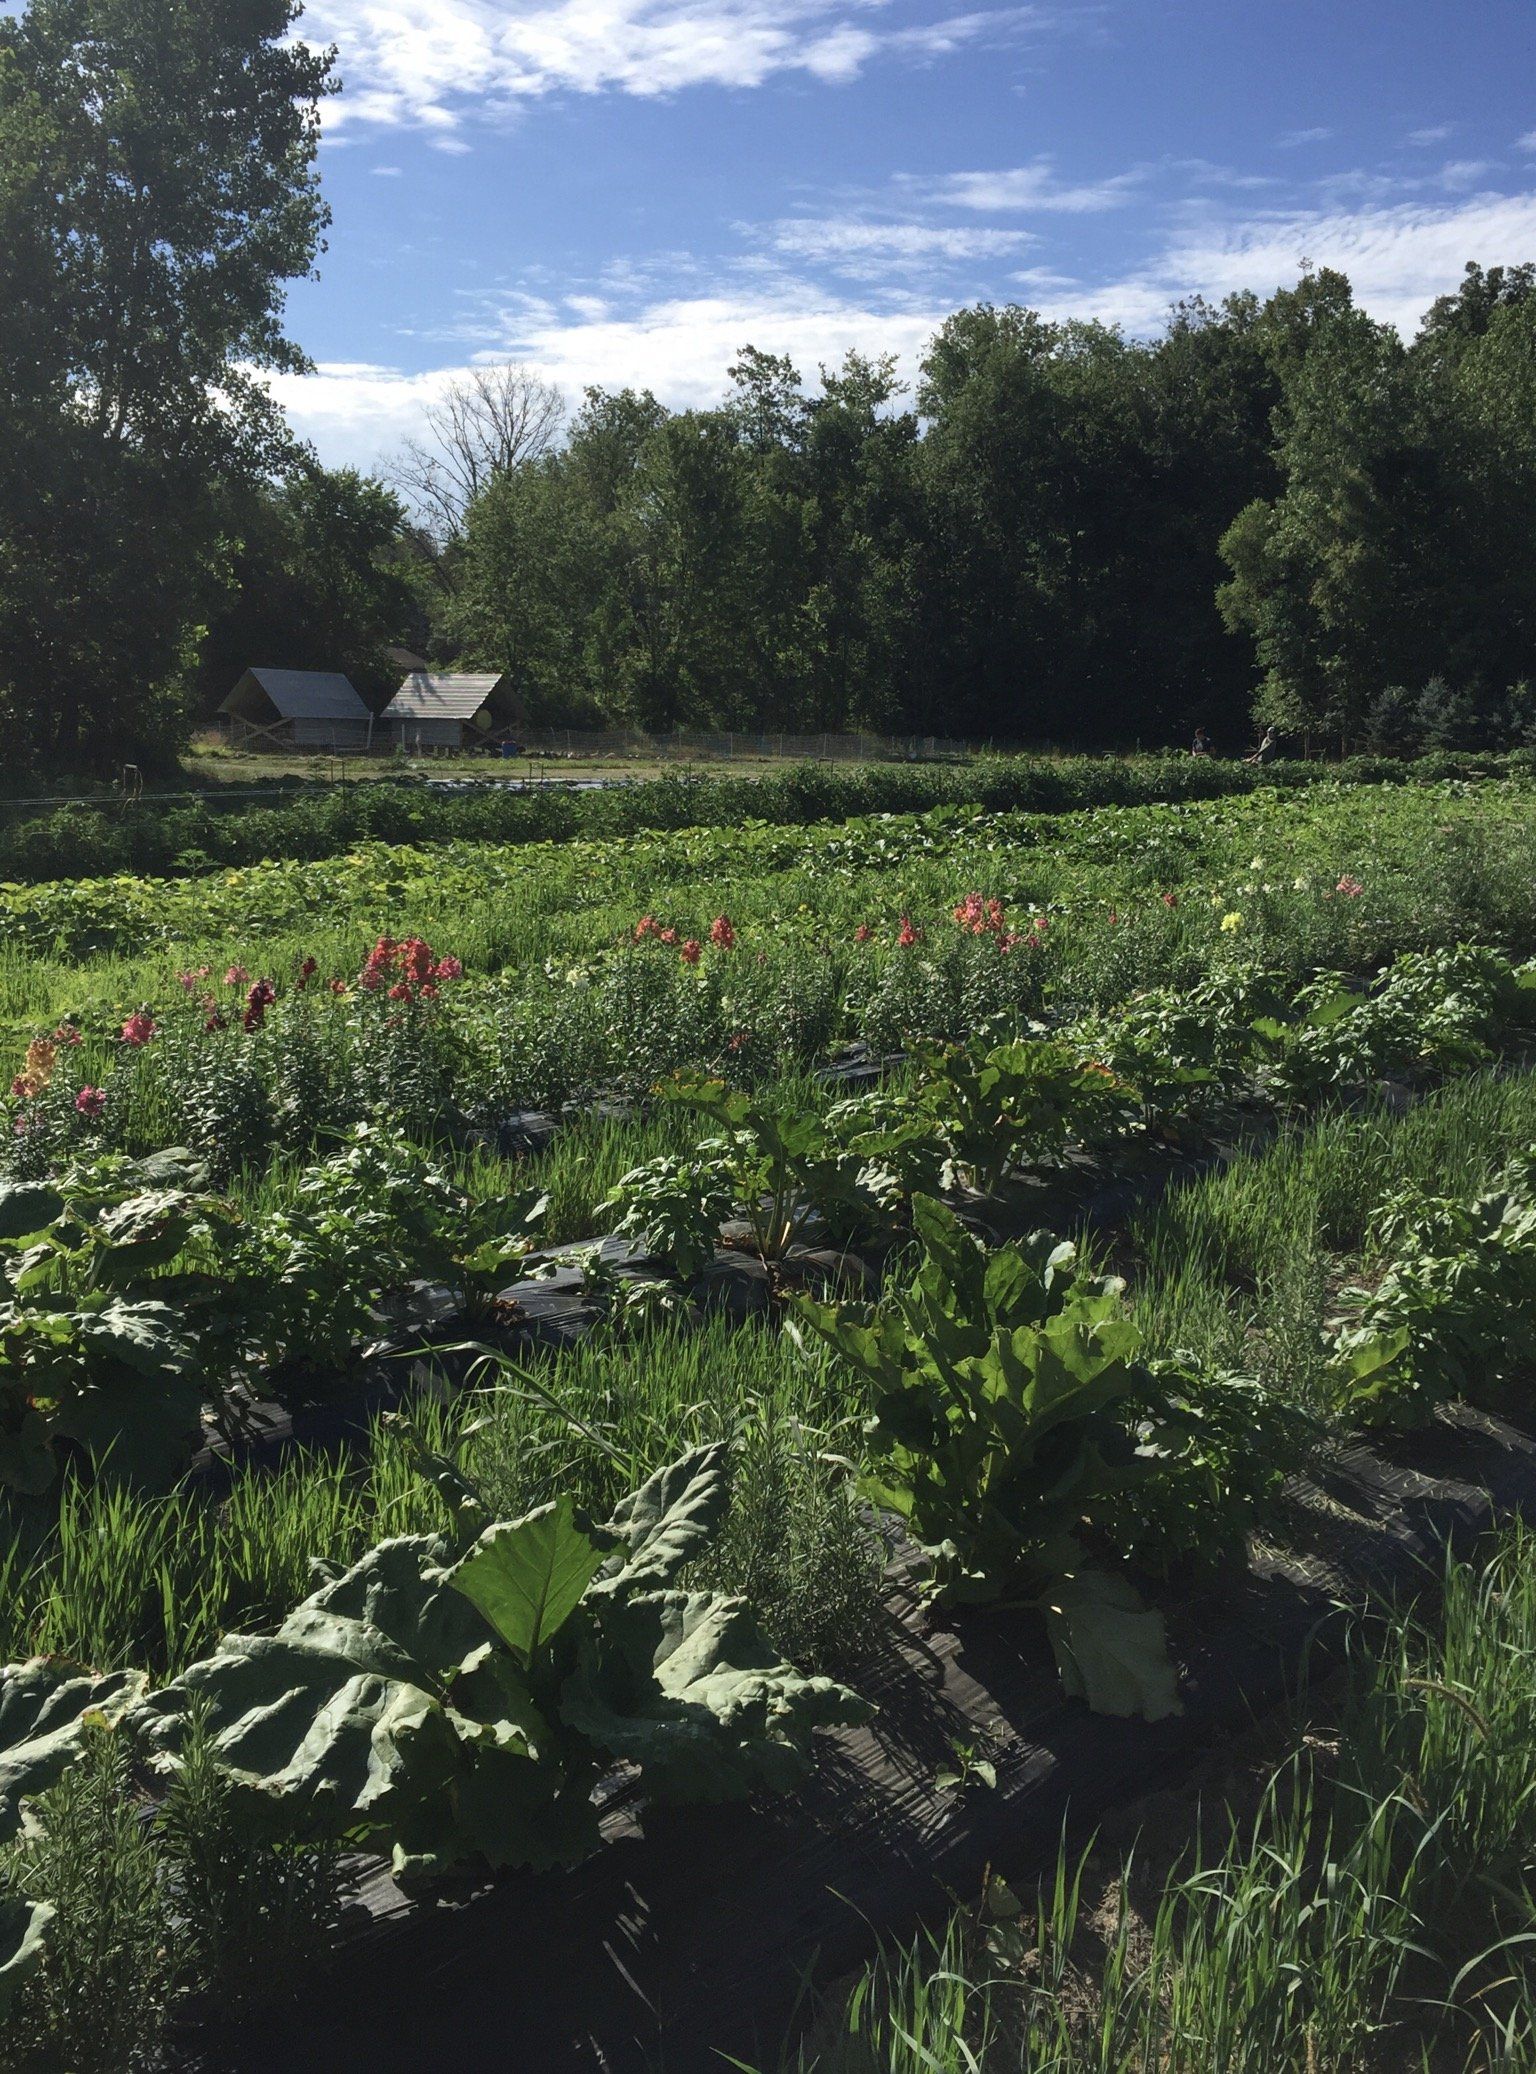 Next Happening: Farm Happenings for August 5, 2020